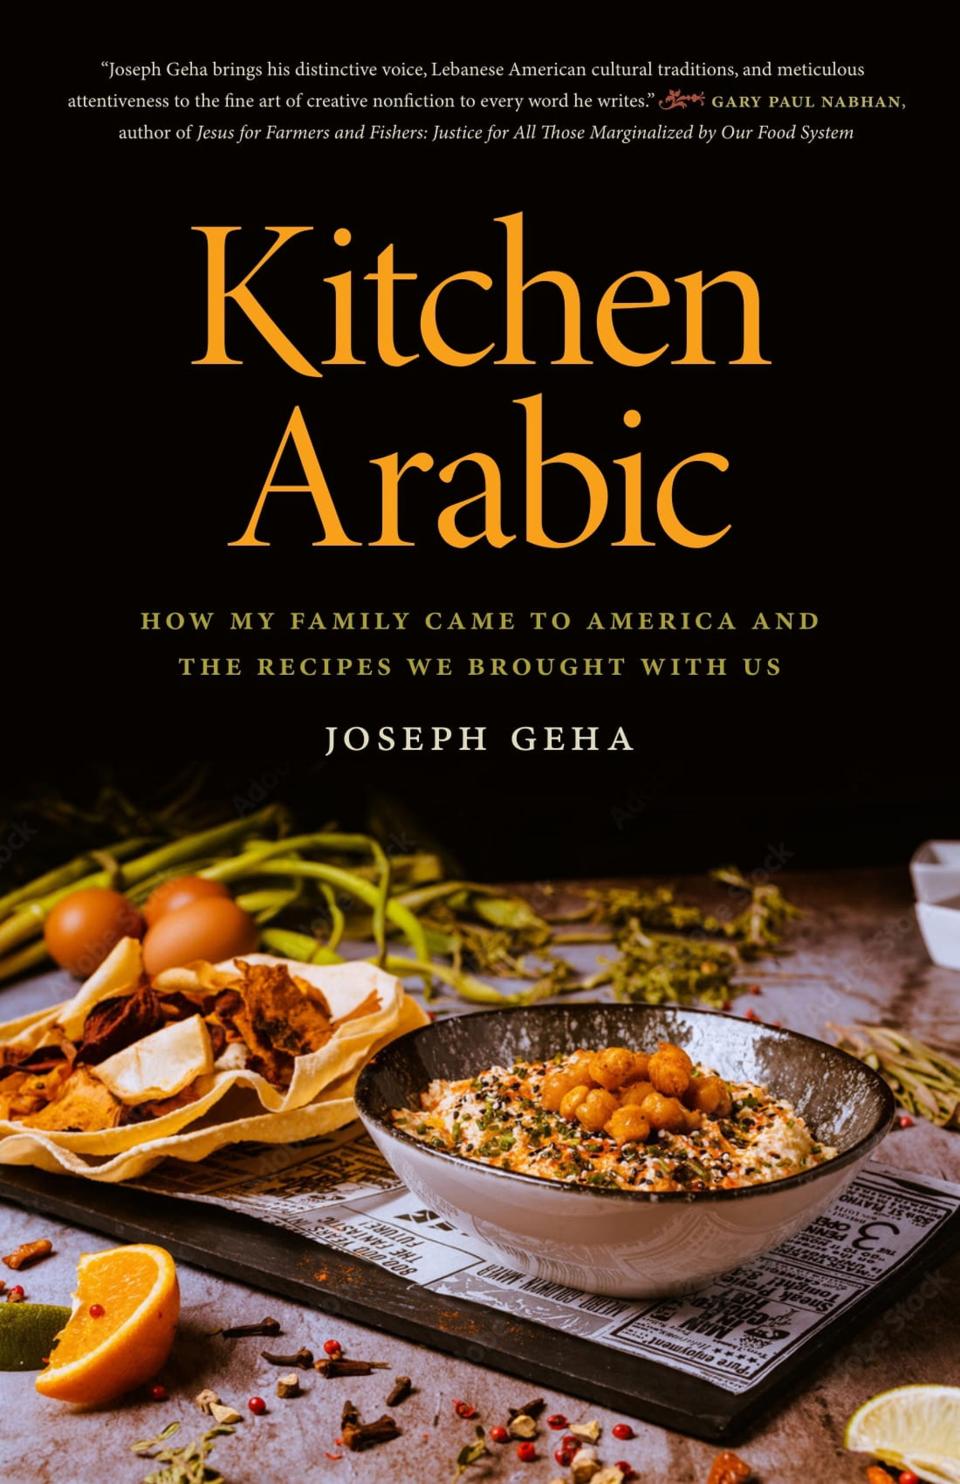 "Kitchen Arabic: How My Family Came to America and the Recipes We Brought with Us," is available from online sources and locally at Dog-Eared Books in downtown Ames.